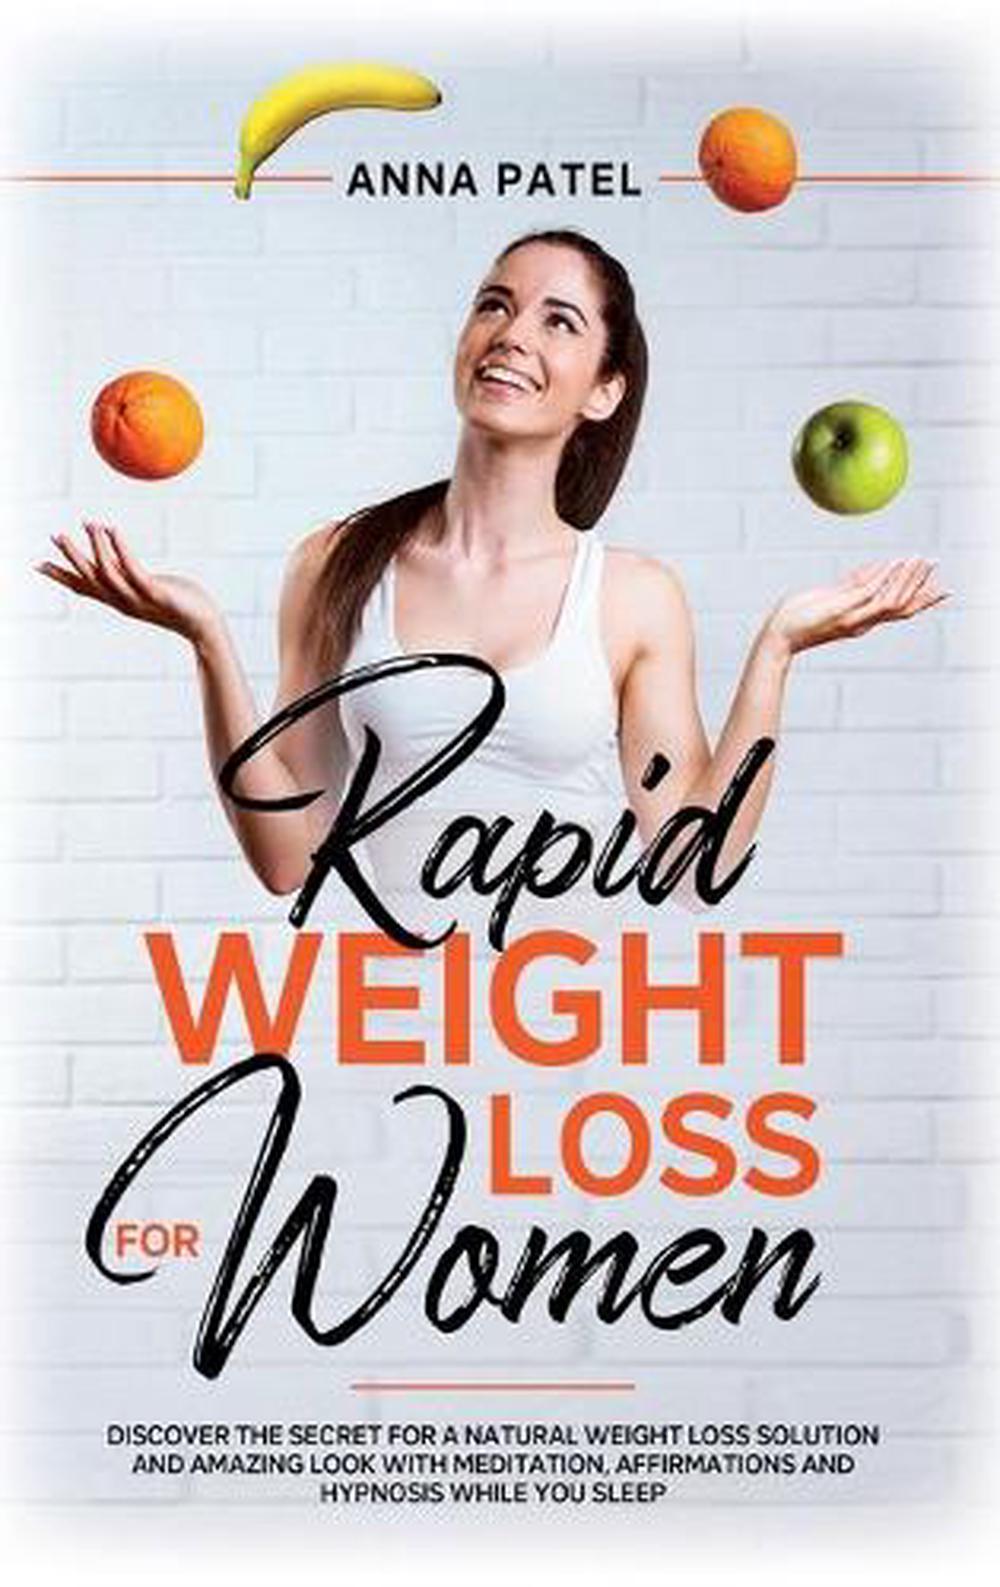 Rapid Weight Loss for Women by Patel Anna Patel (English) Hardcover